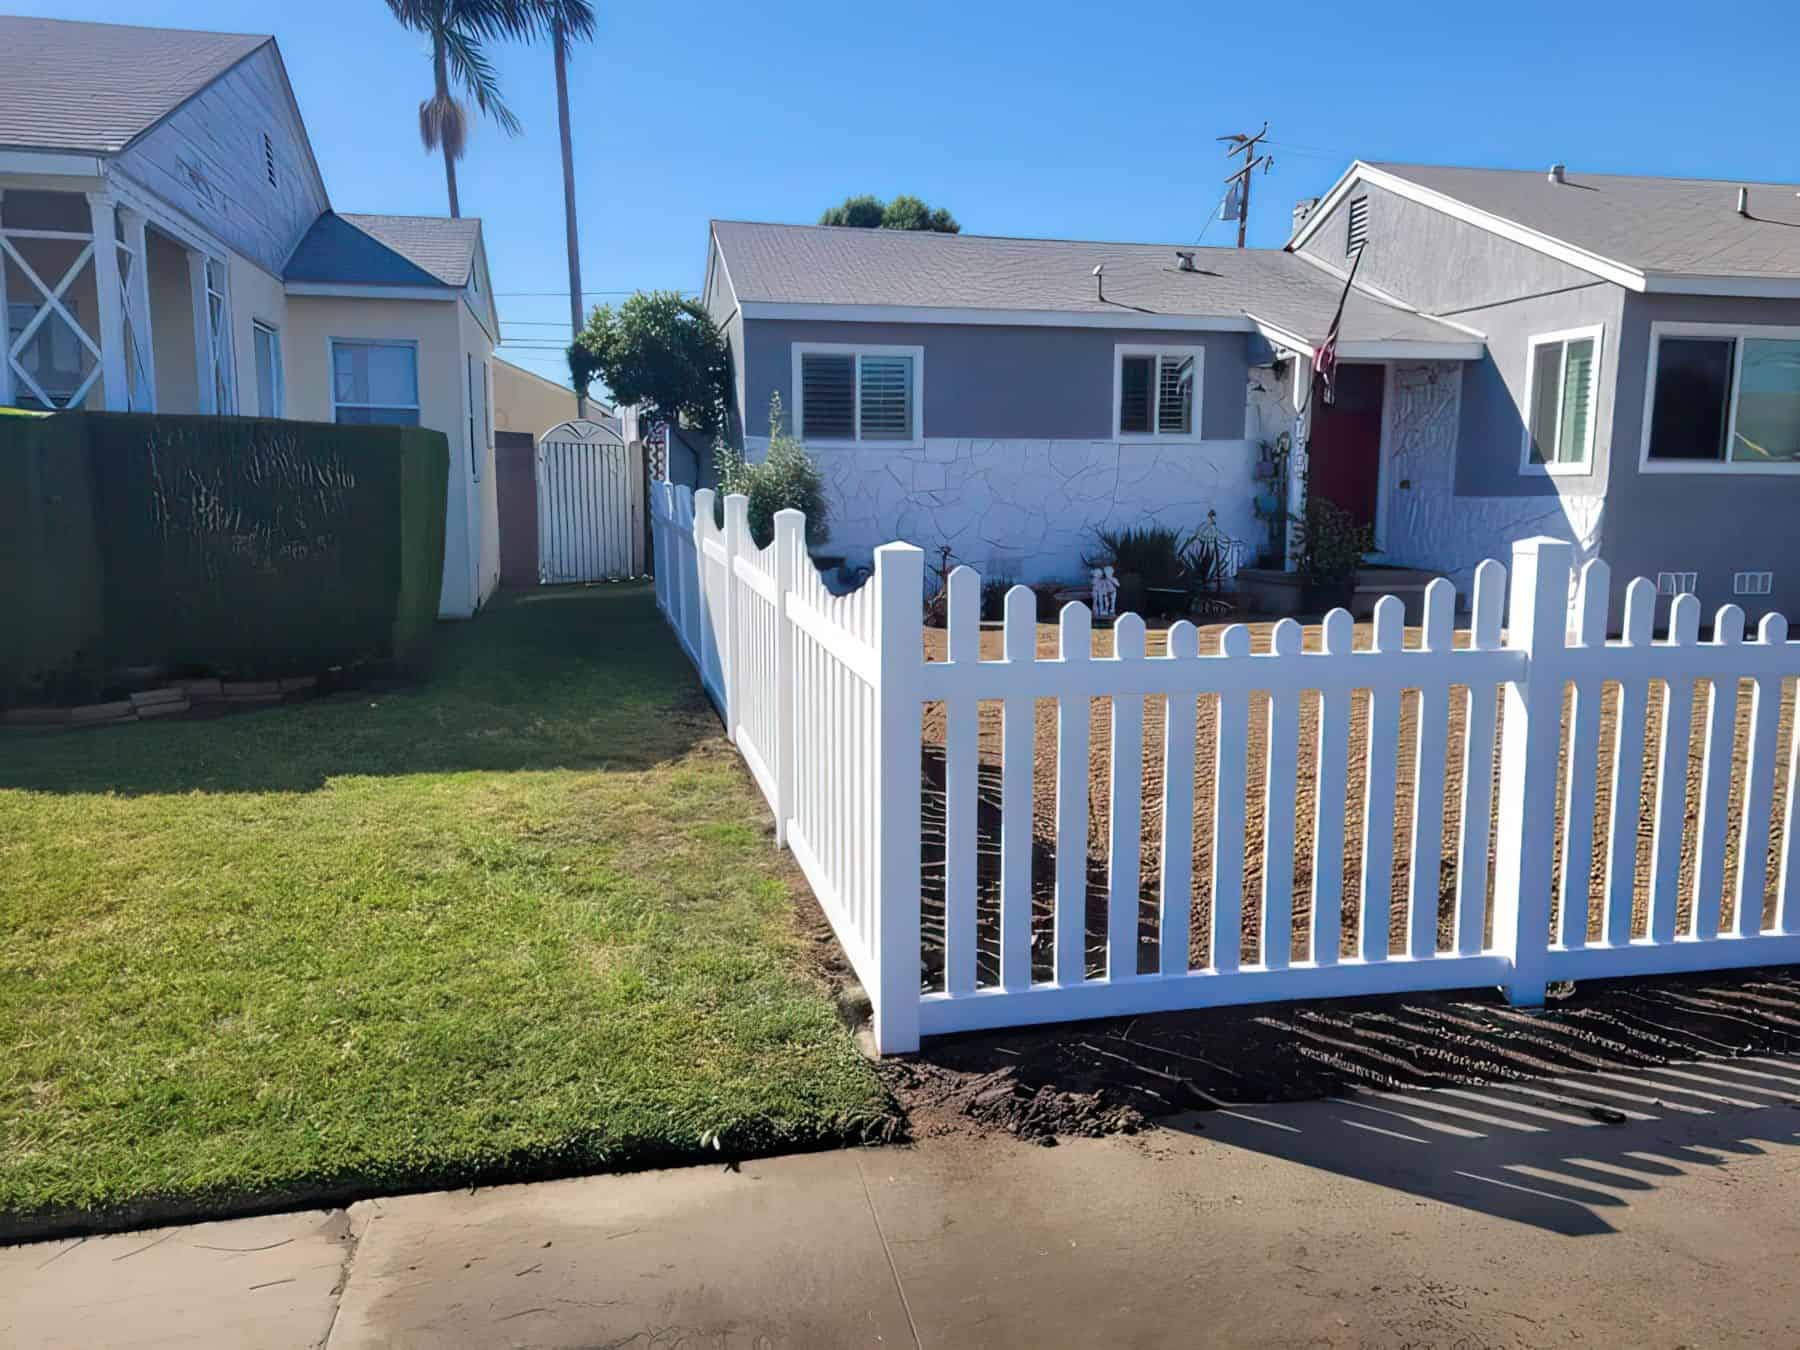 Vinyl dog ear picket fence surrounds ranch house with concrete sidewalk & driveway; suburban homes in background.